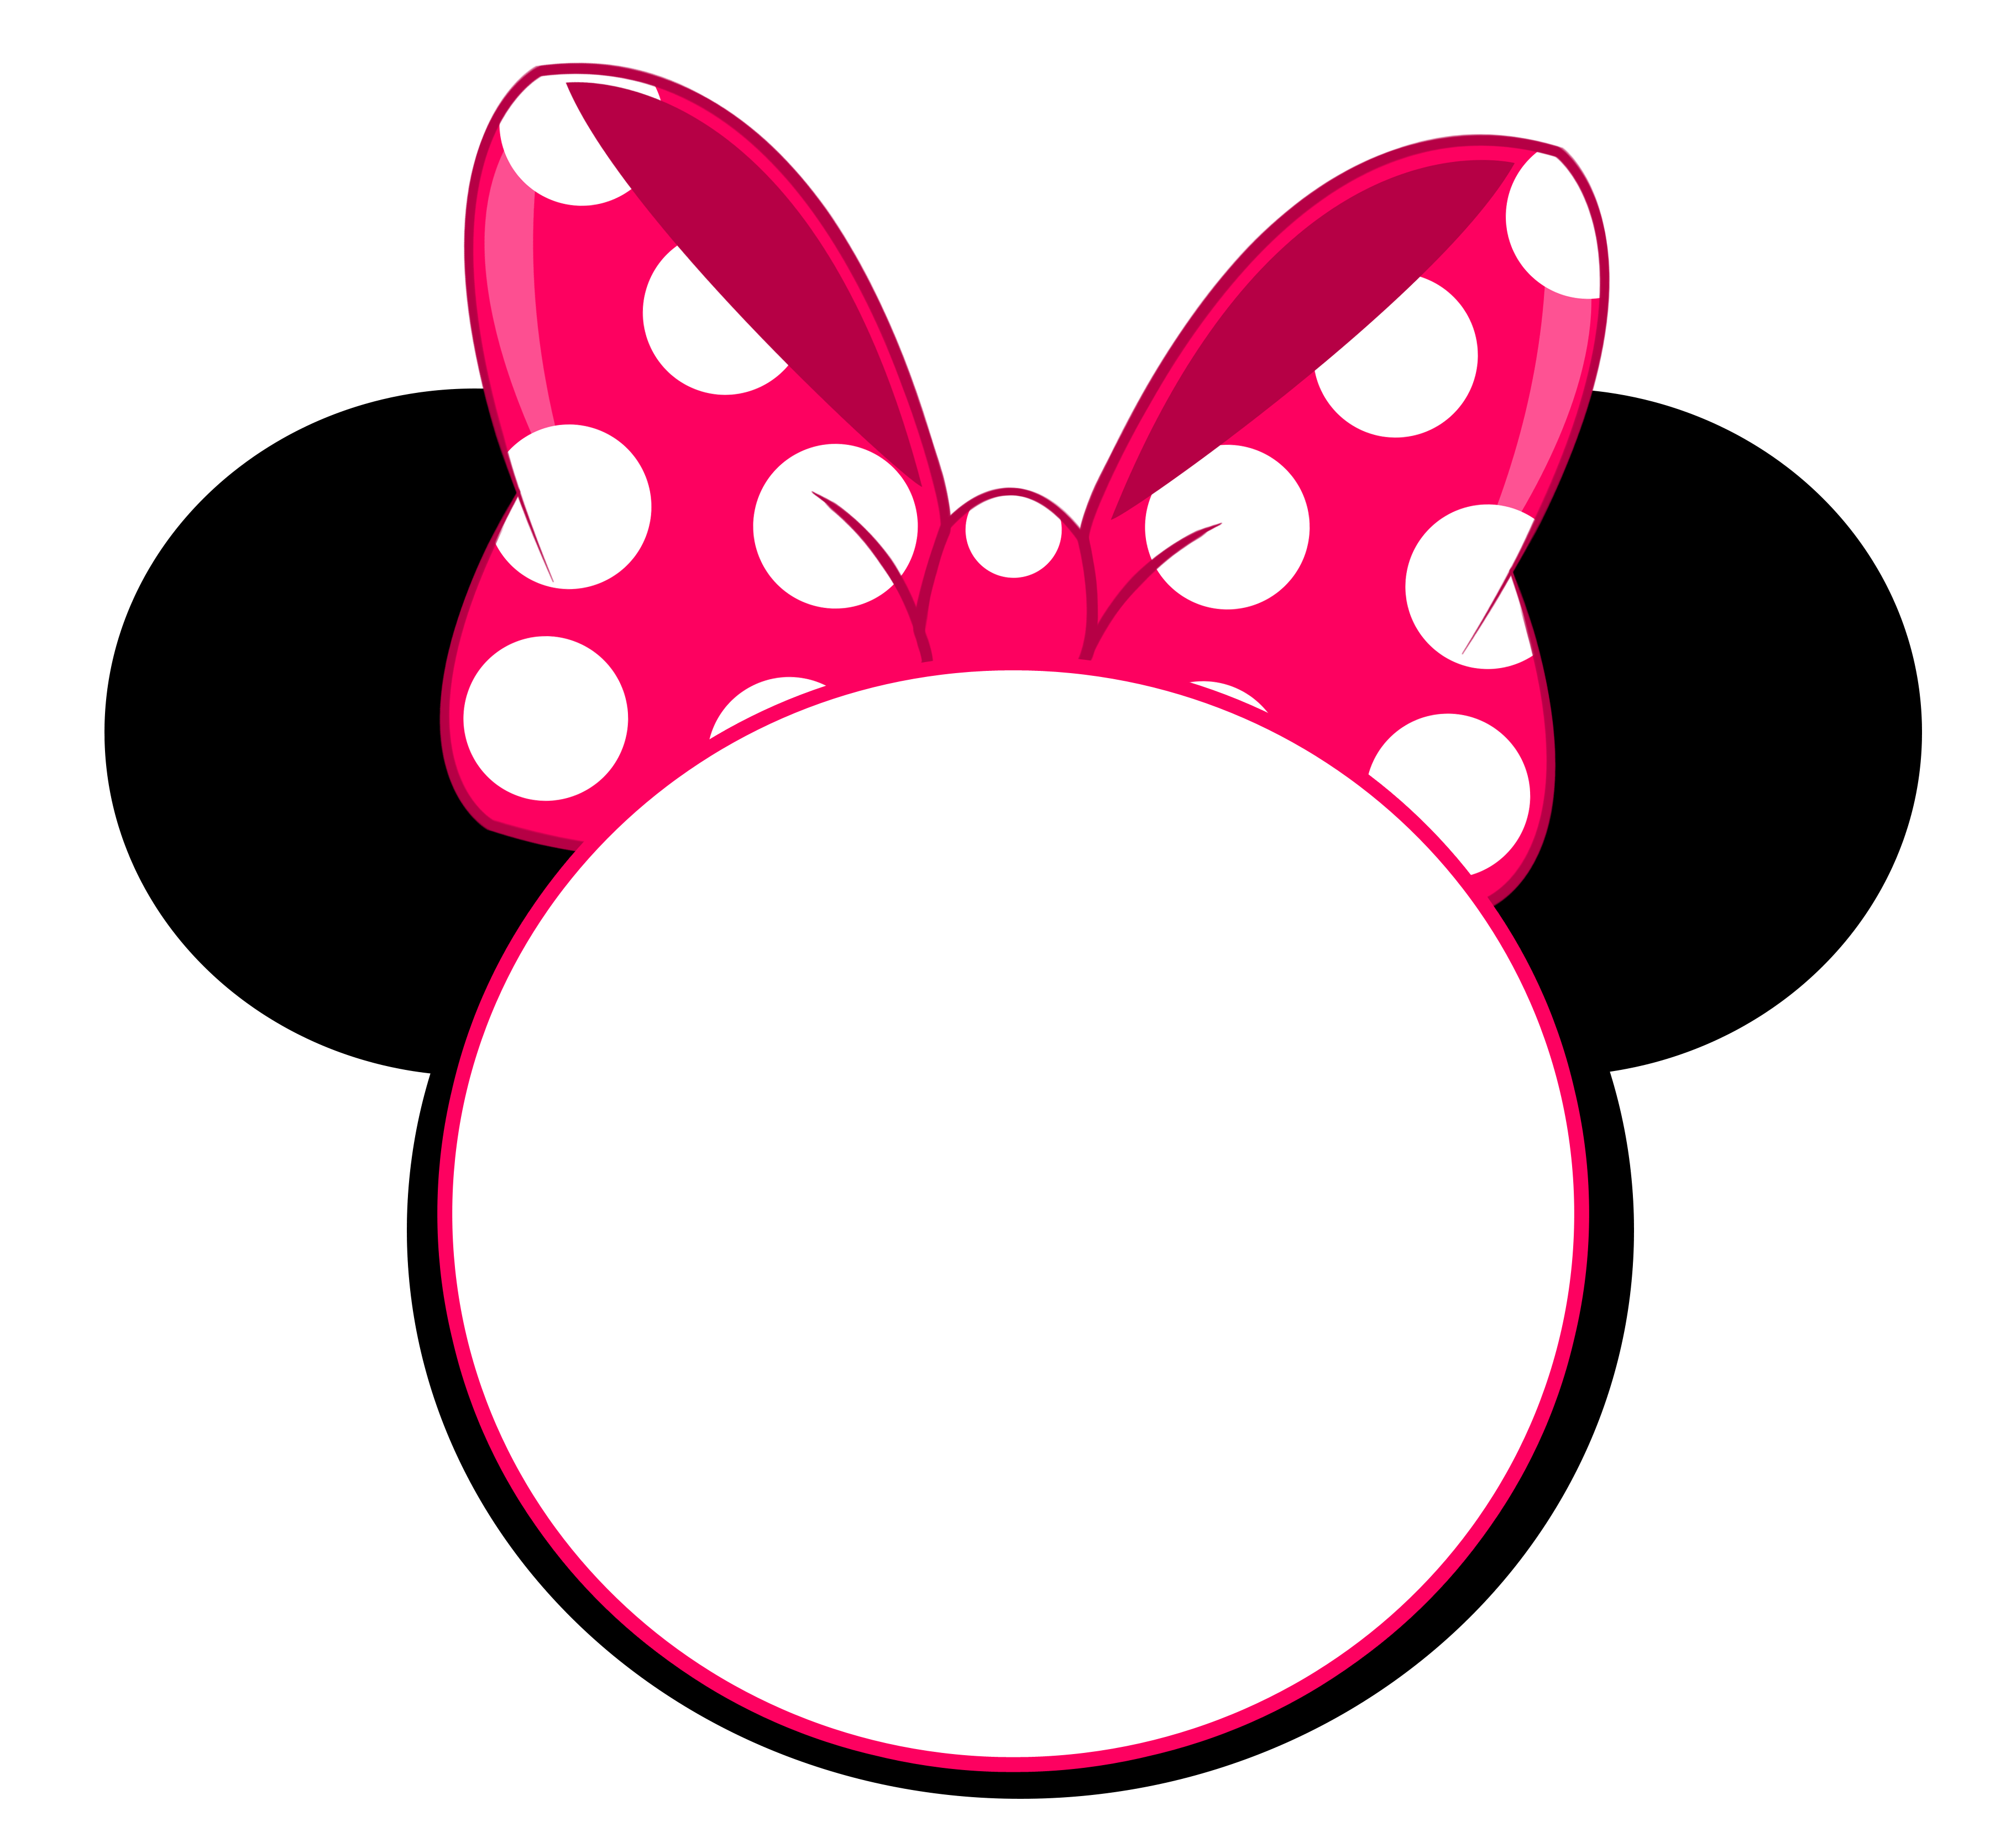 Minnie mouse ears clipart clipart images gallery for free